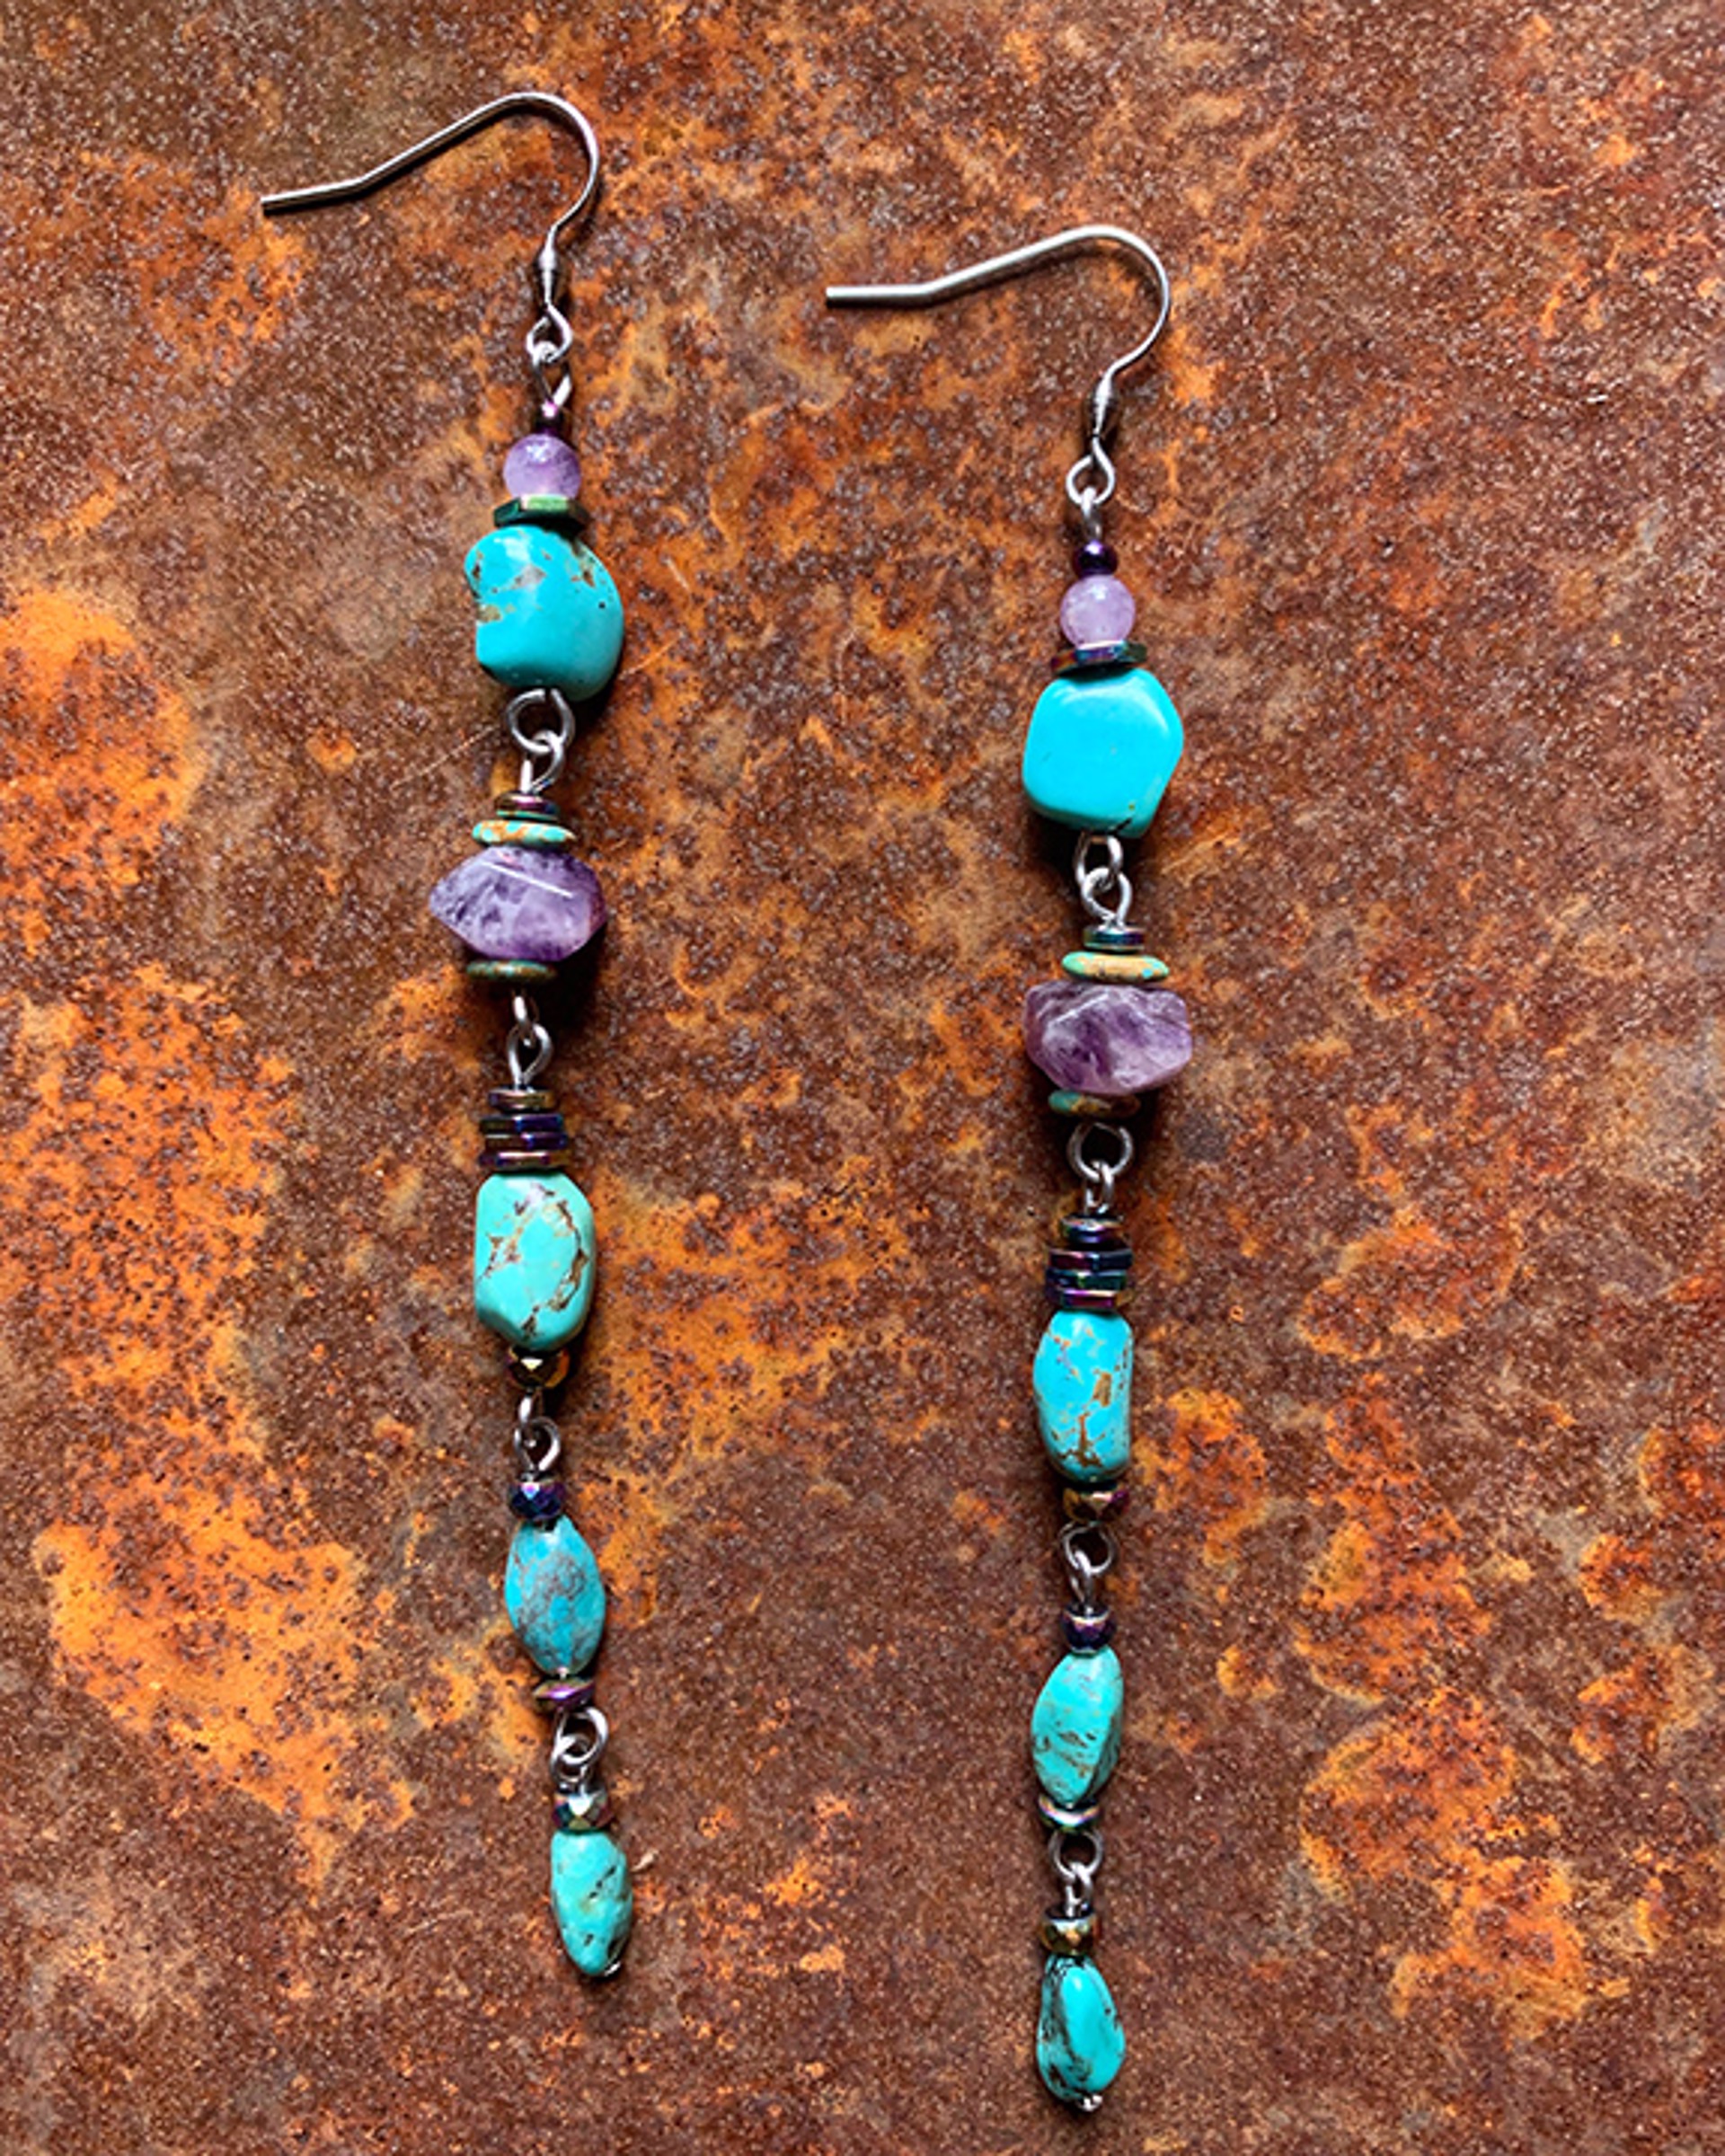 K717 Turquoise and Amethyst Earrings by Kelly Ormsby